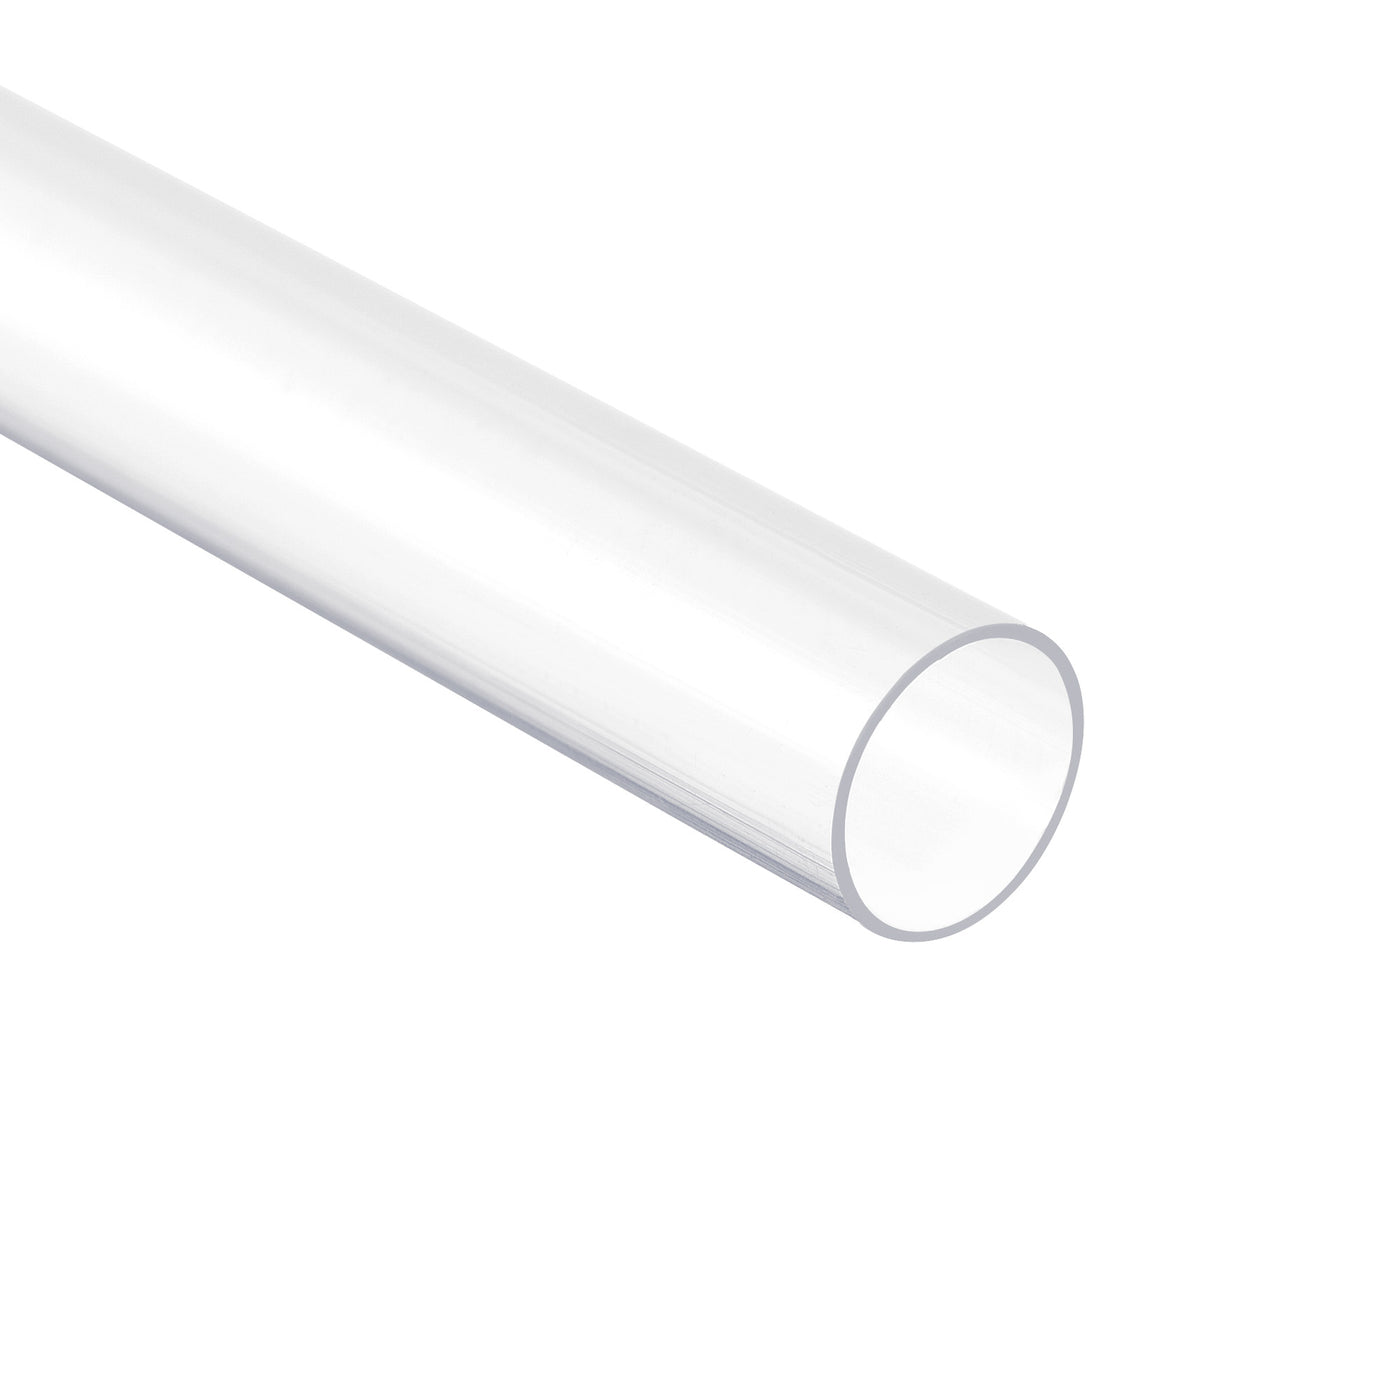 uxcell Uxcell Polycarbonate Rigid Round Clear Tubing 20mm(0.78 Inch)IDx21mm(0.82 Inch)ODx230mm(9 Inch) Length Plastic Storage Transparent Tube with Lids